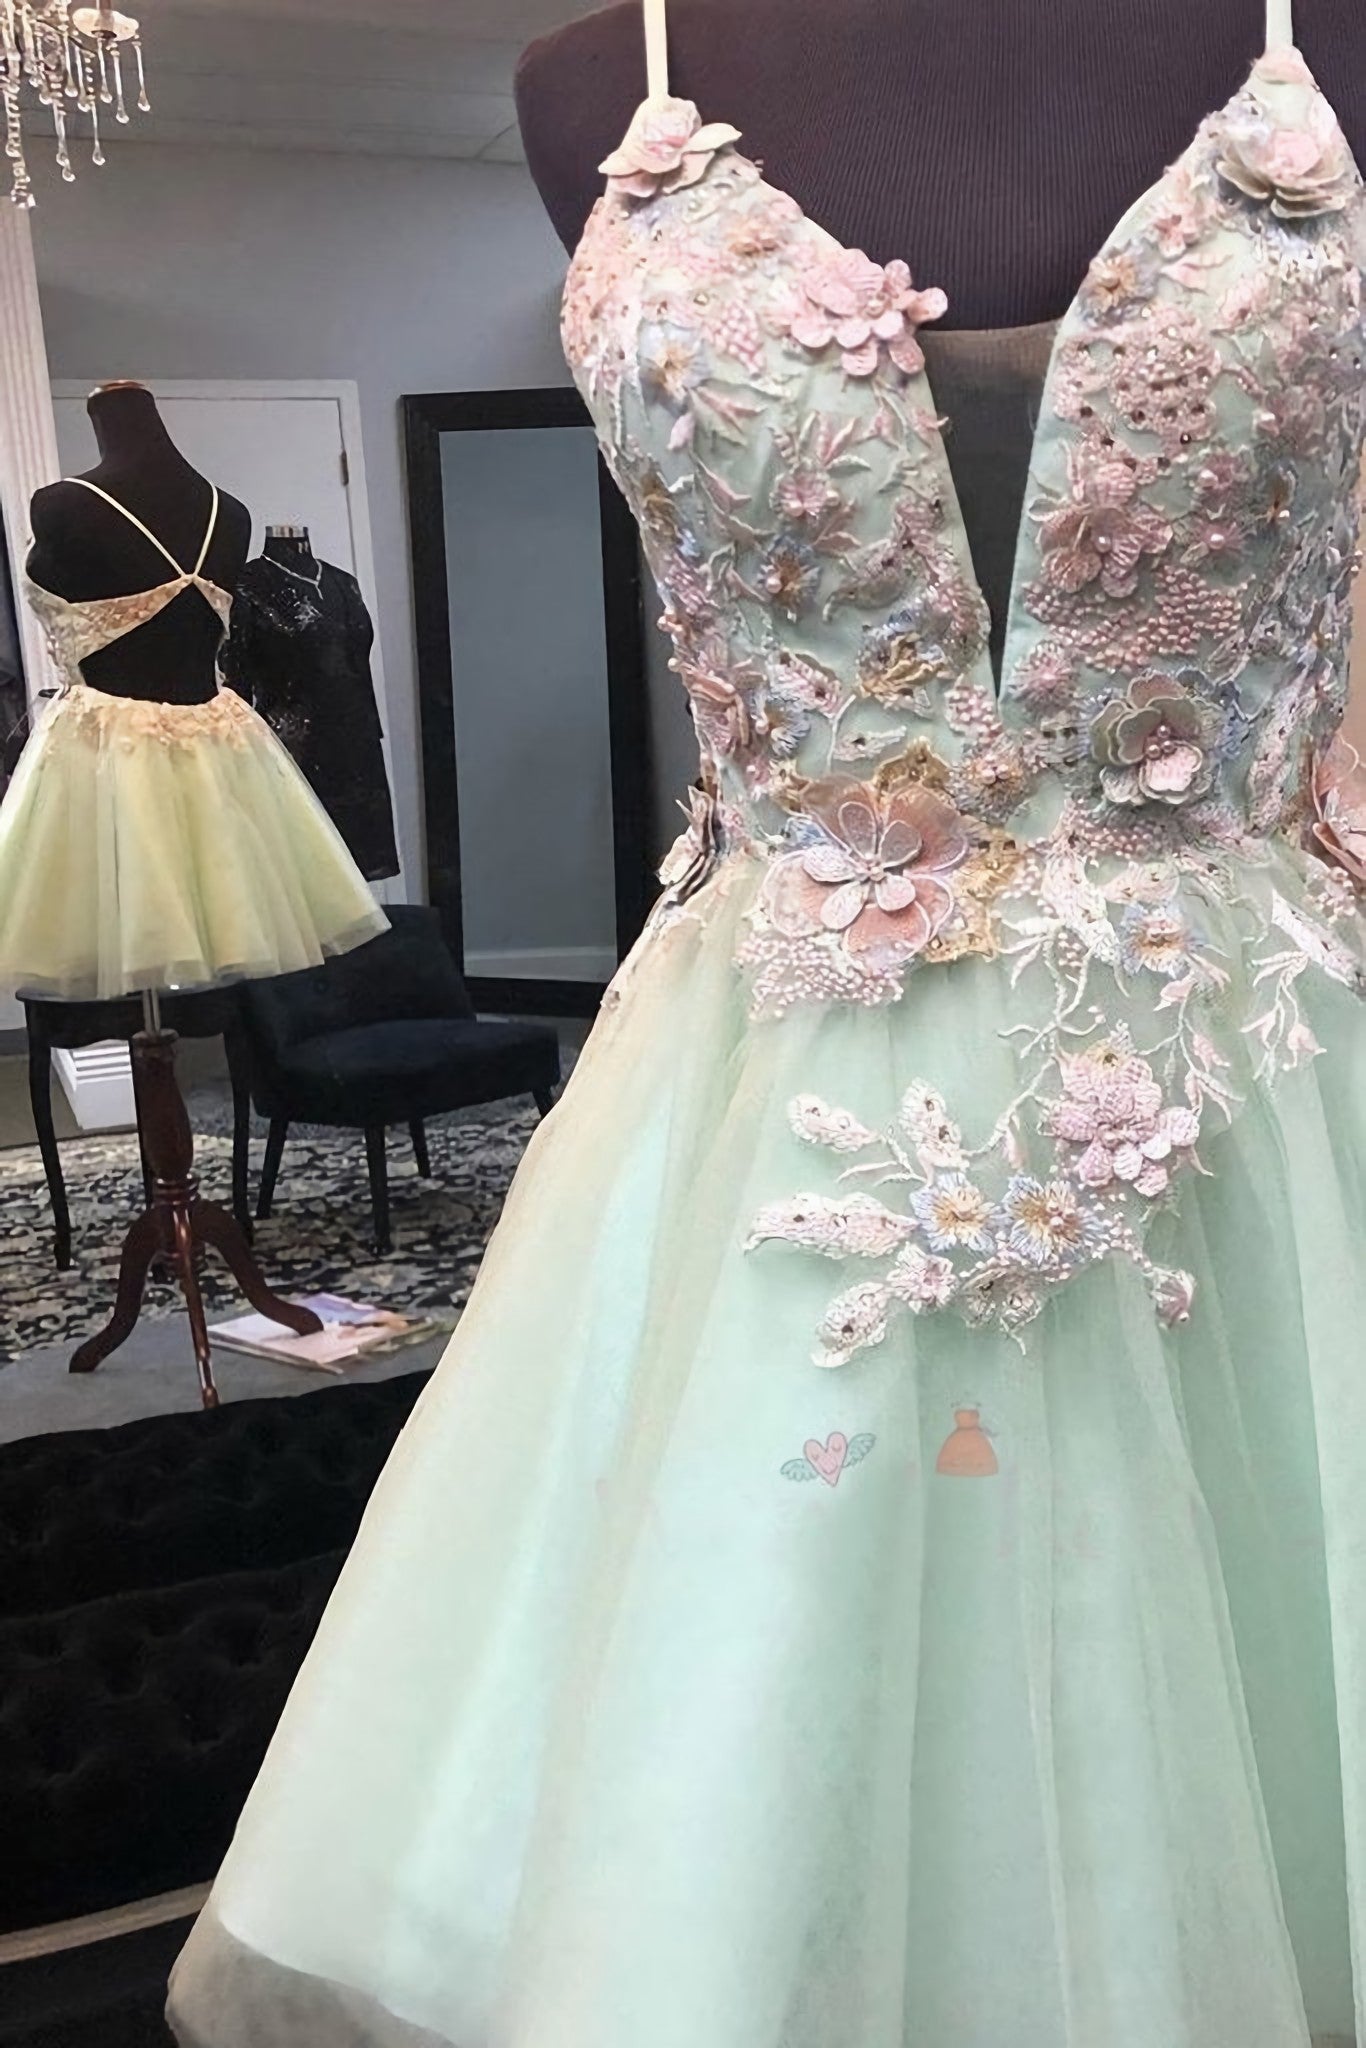 Mint Green Short Corset Homecoming Dress, With Flowers Mini Tulle Graduation Dress, With Pearls Gowns, Prom Dresses With Sleeve